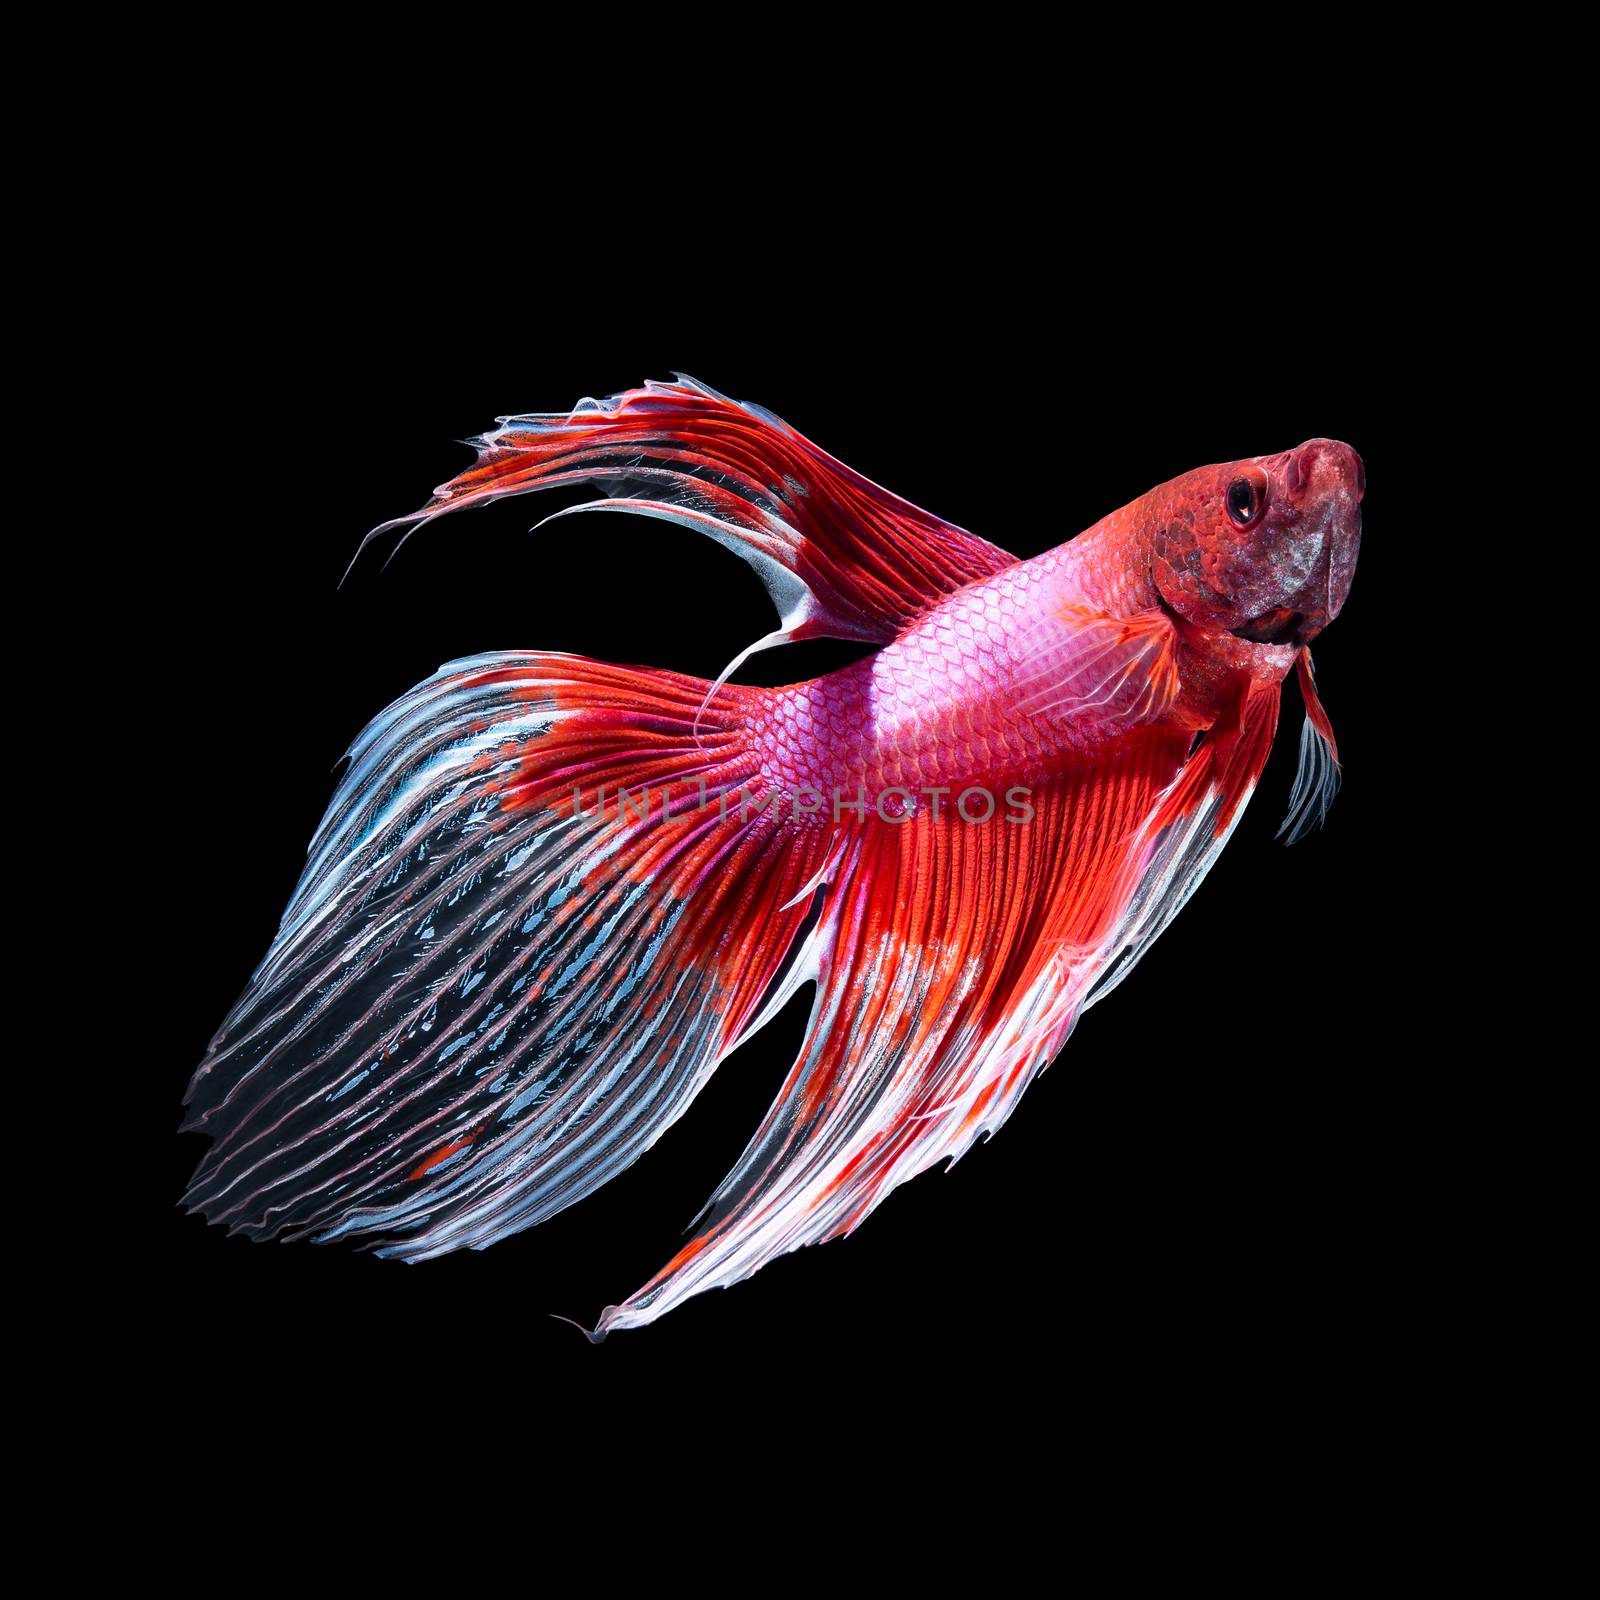 Red siamese fighting fish, betta fish, butterfly tail profile, on black background